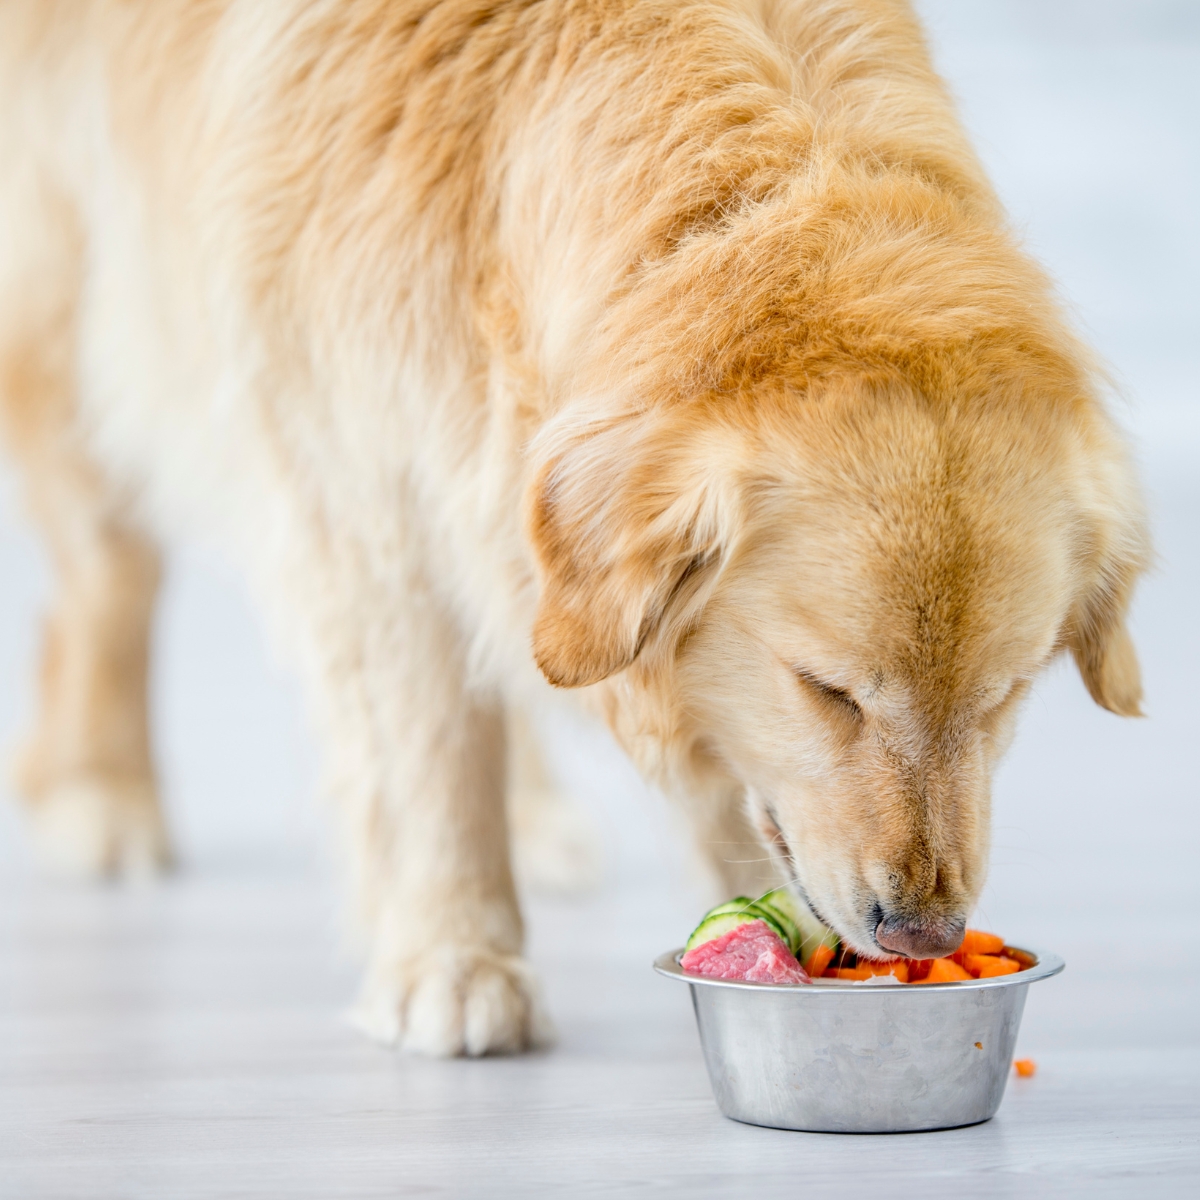 The Ingestion of Cucumbers May Pose a Threat to Dogs.